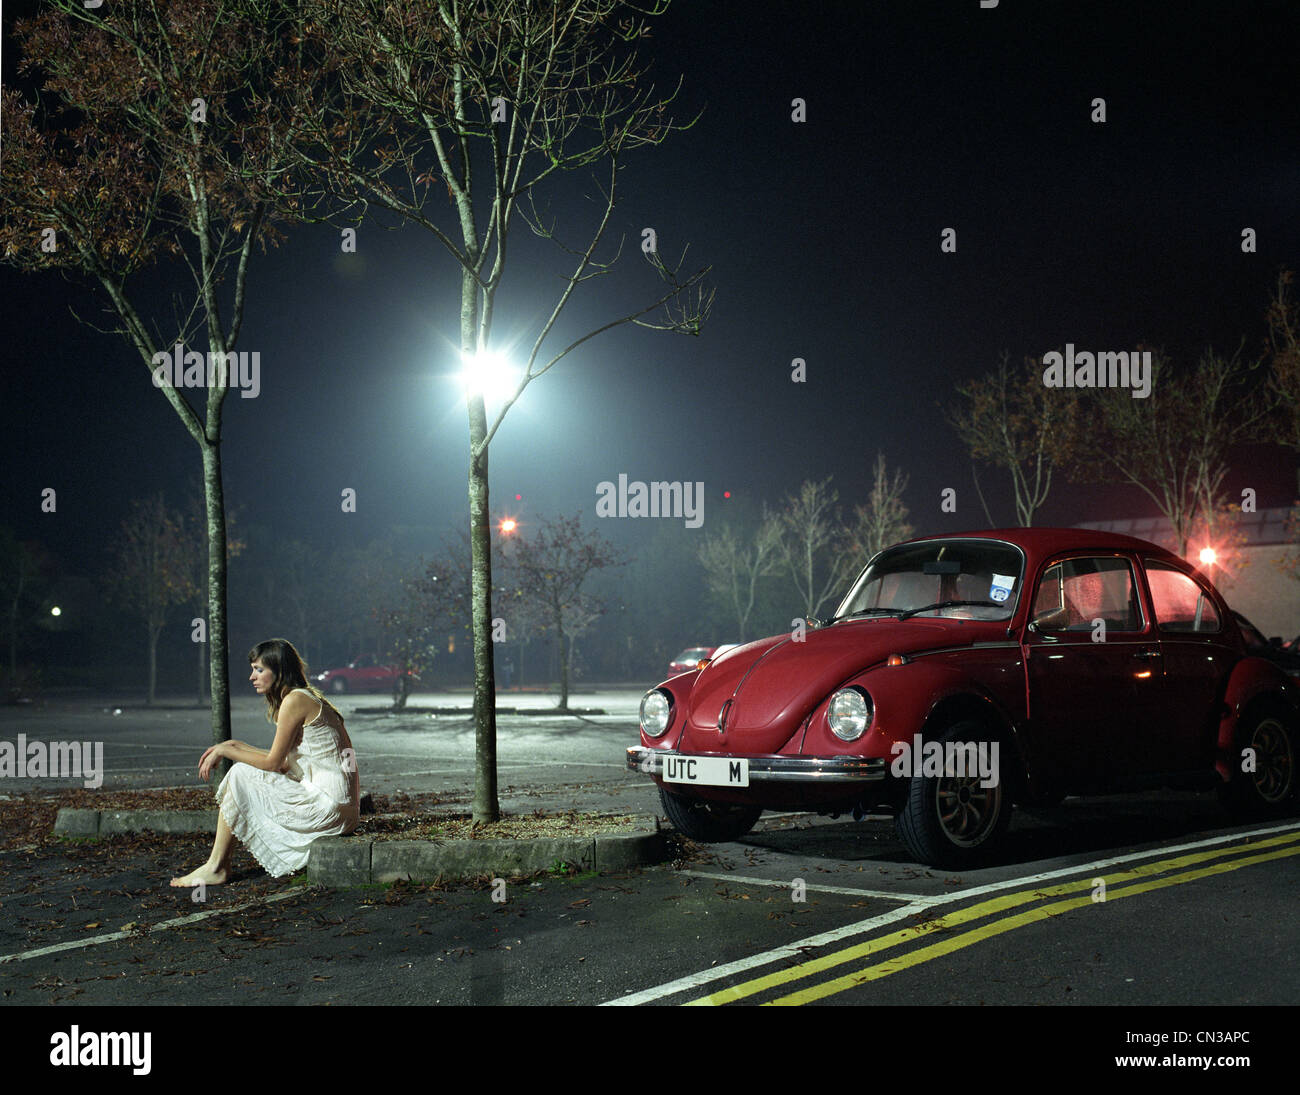 Woman sitting in car park at night Stock Photo